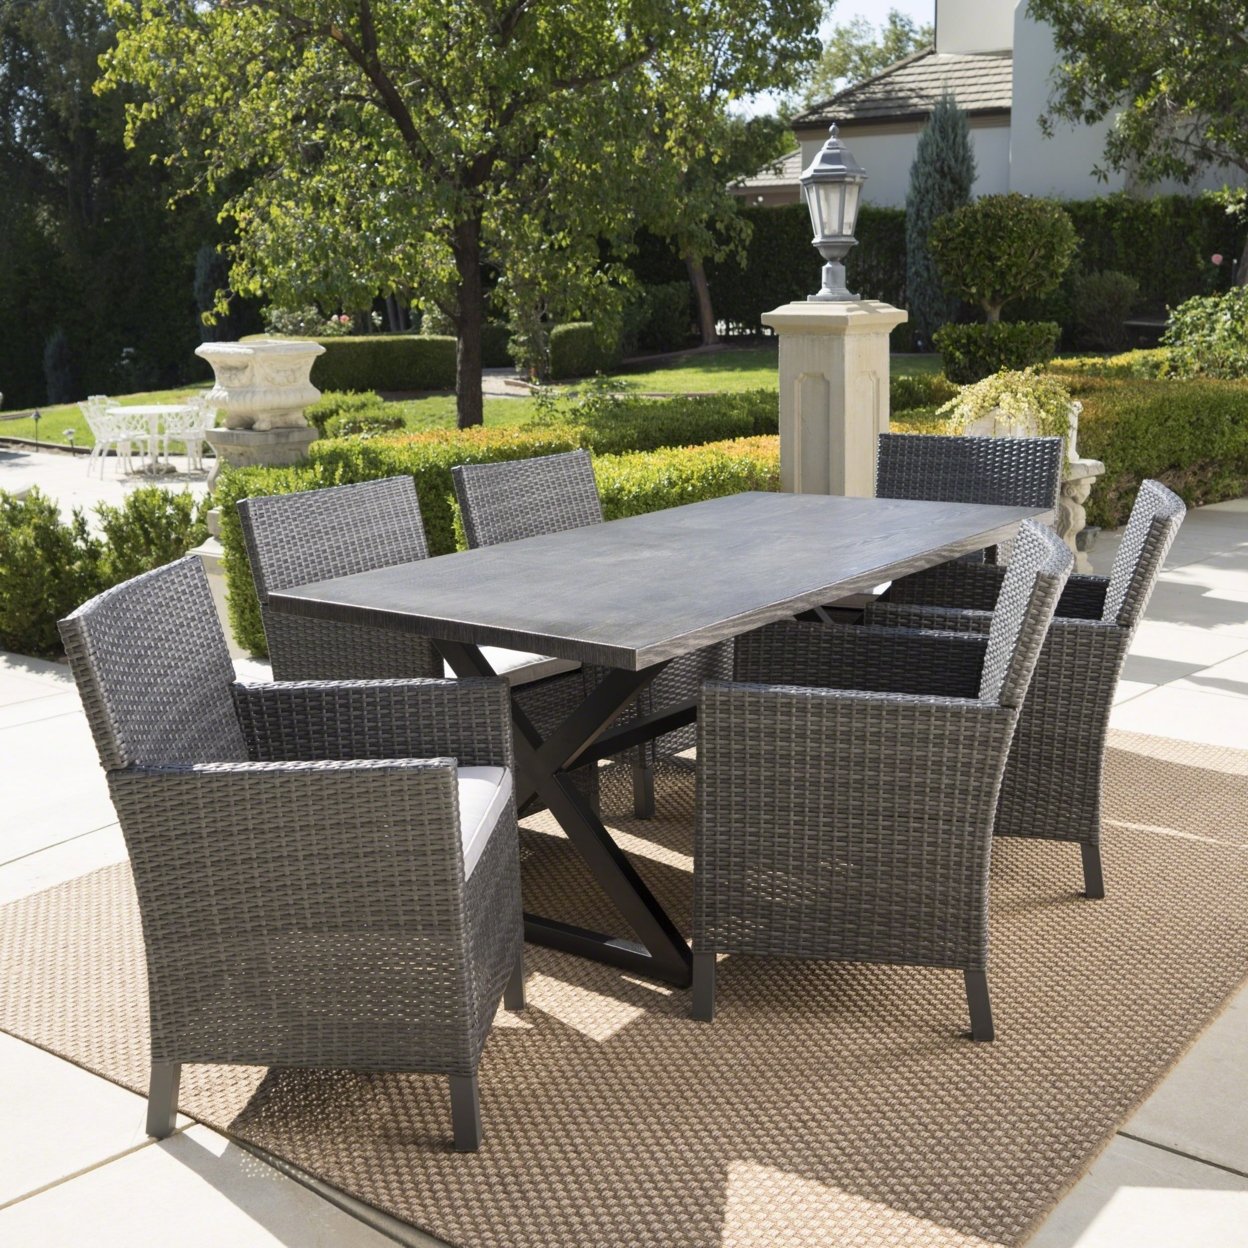 Blane Outdoor 7 Piece Grey Dining Set With Aluminum Dining Table - Multi-brown/Light Brown